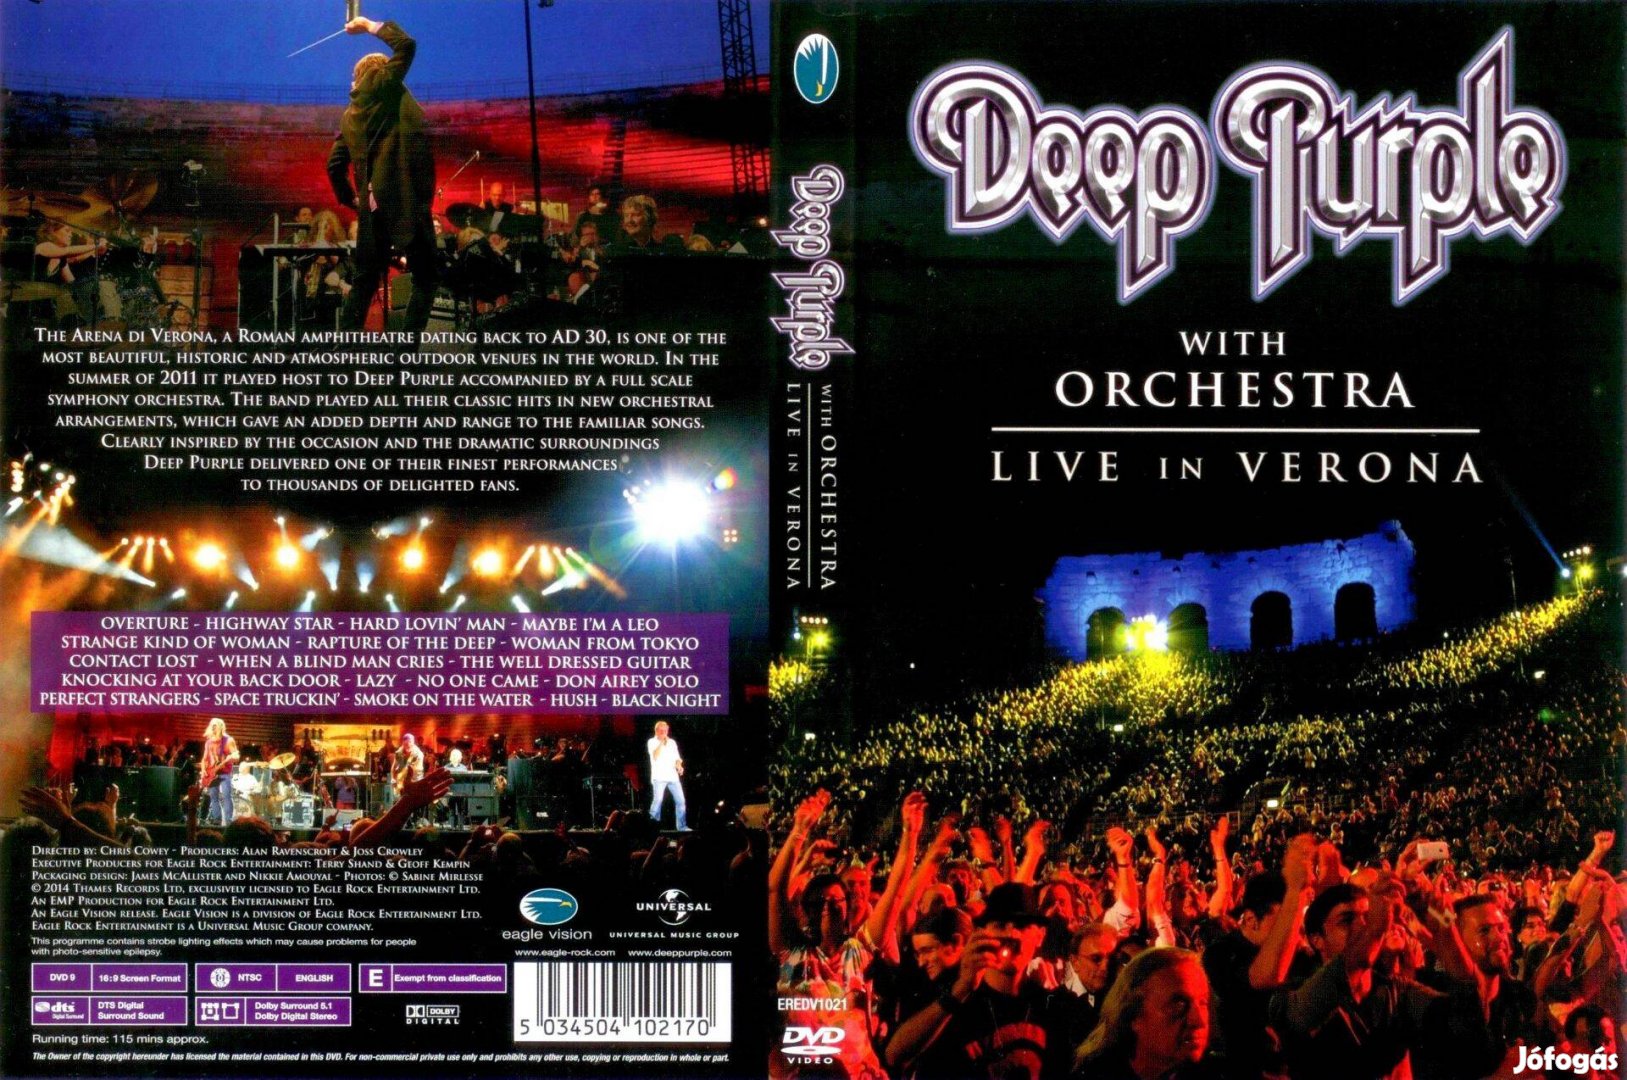 Deep Purple with Orchestra - Live in Verona DVD